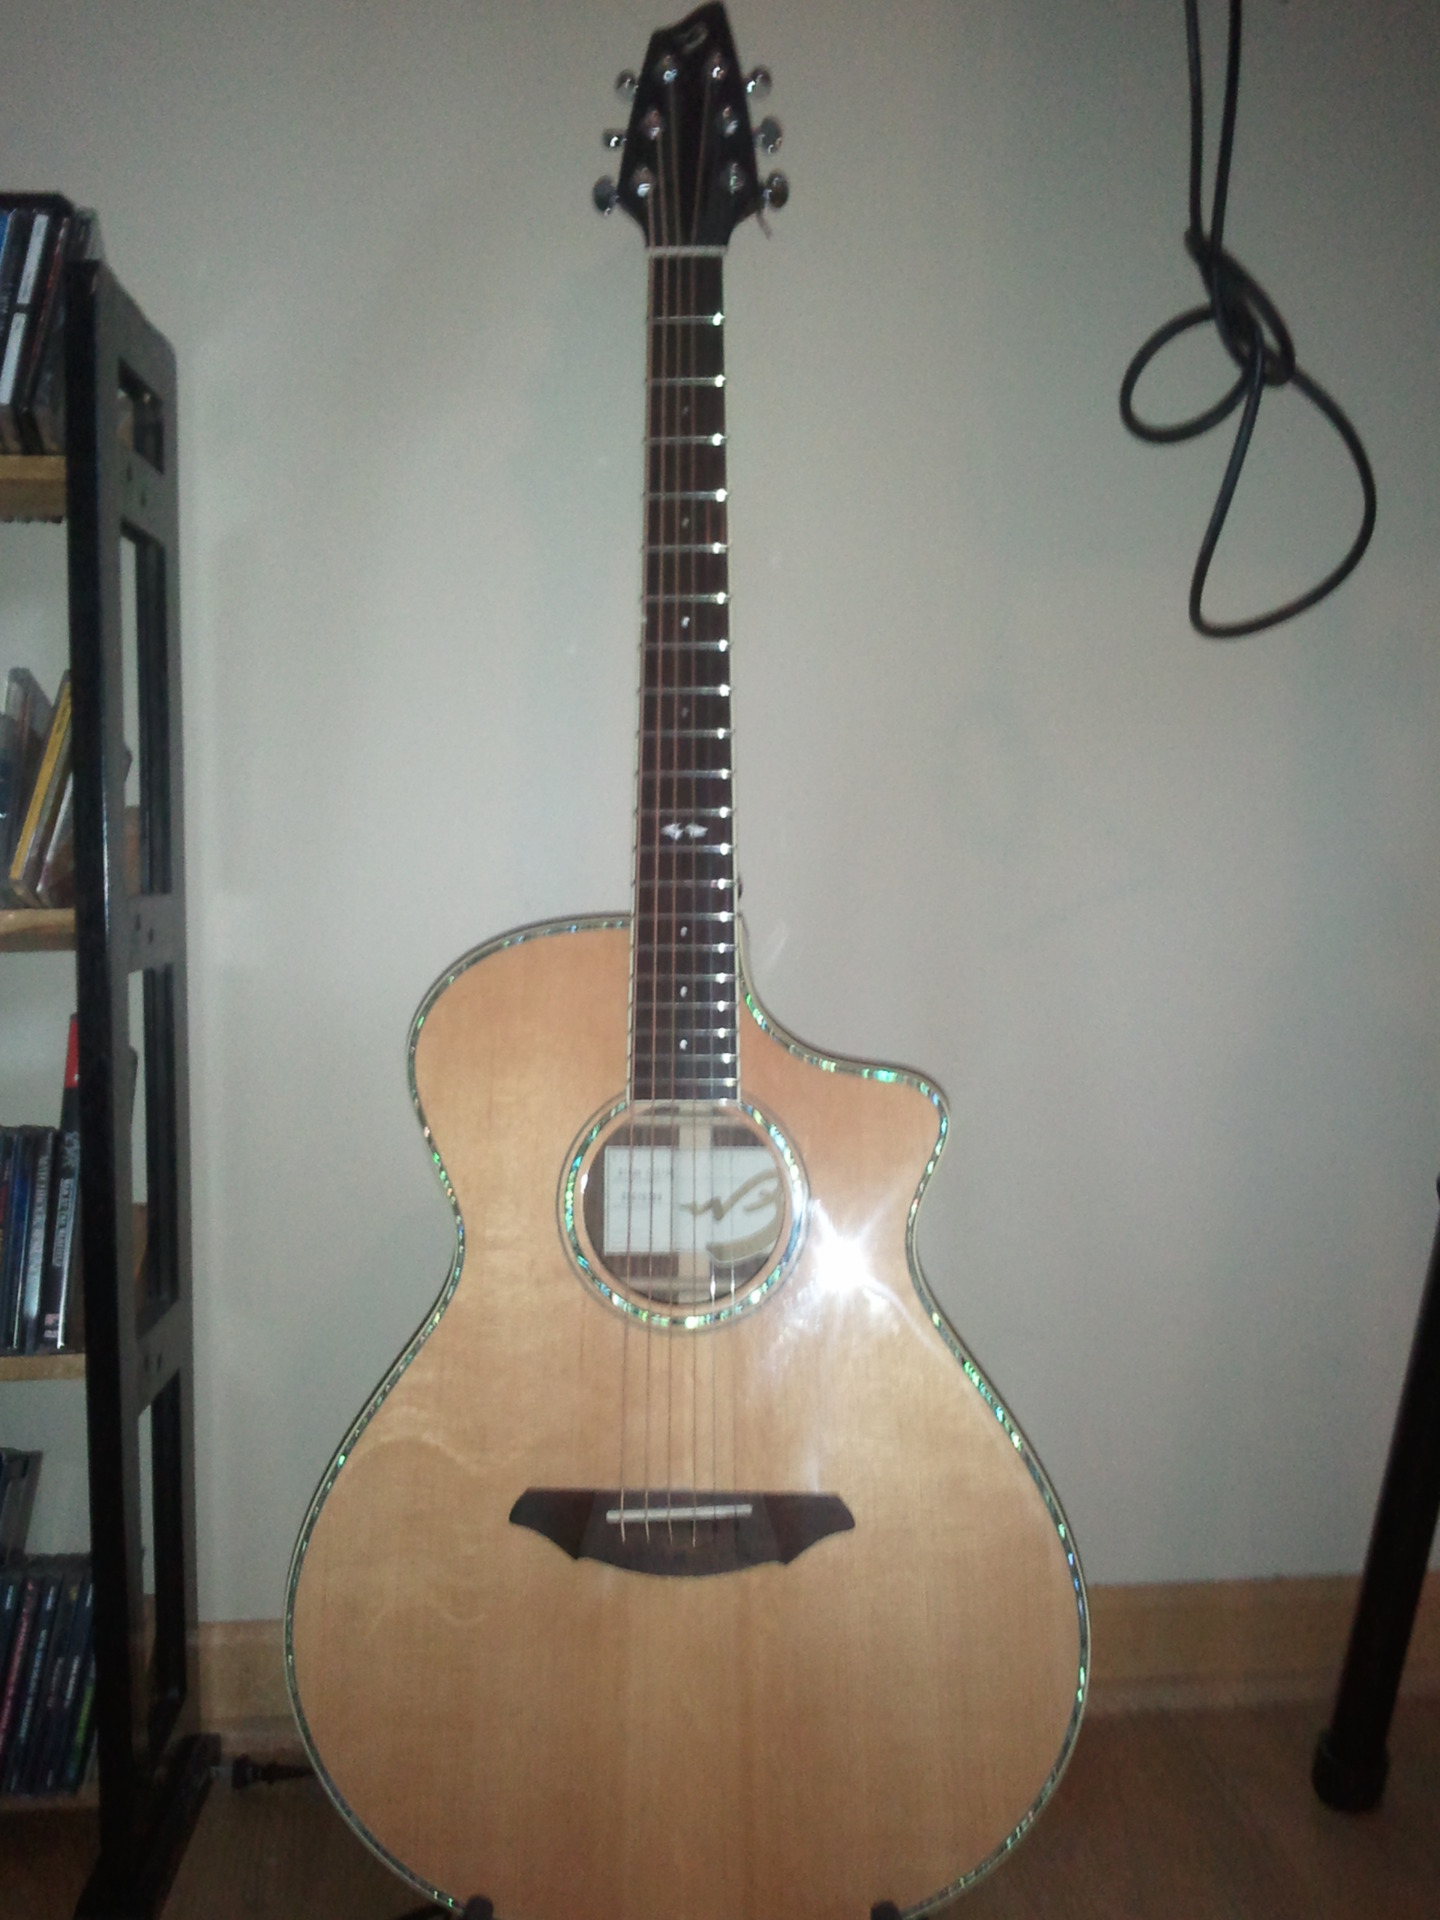  My Breedlove acoustic.  For years I played a free Carlo Robelli, before I decided to upgrade to one that could be plugged into an amp. So glad I got this one, it's an amazing guitar.